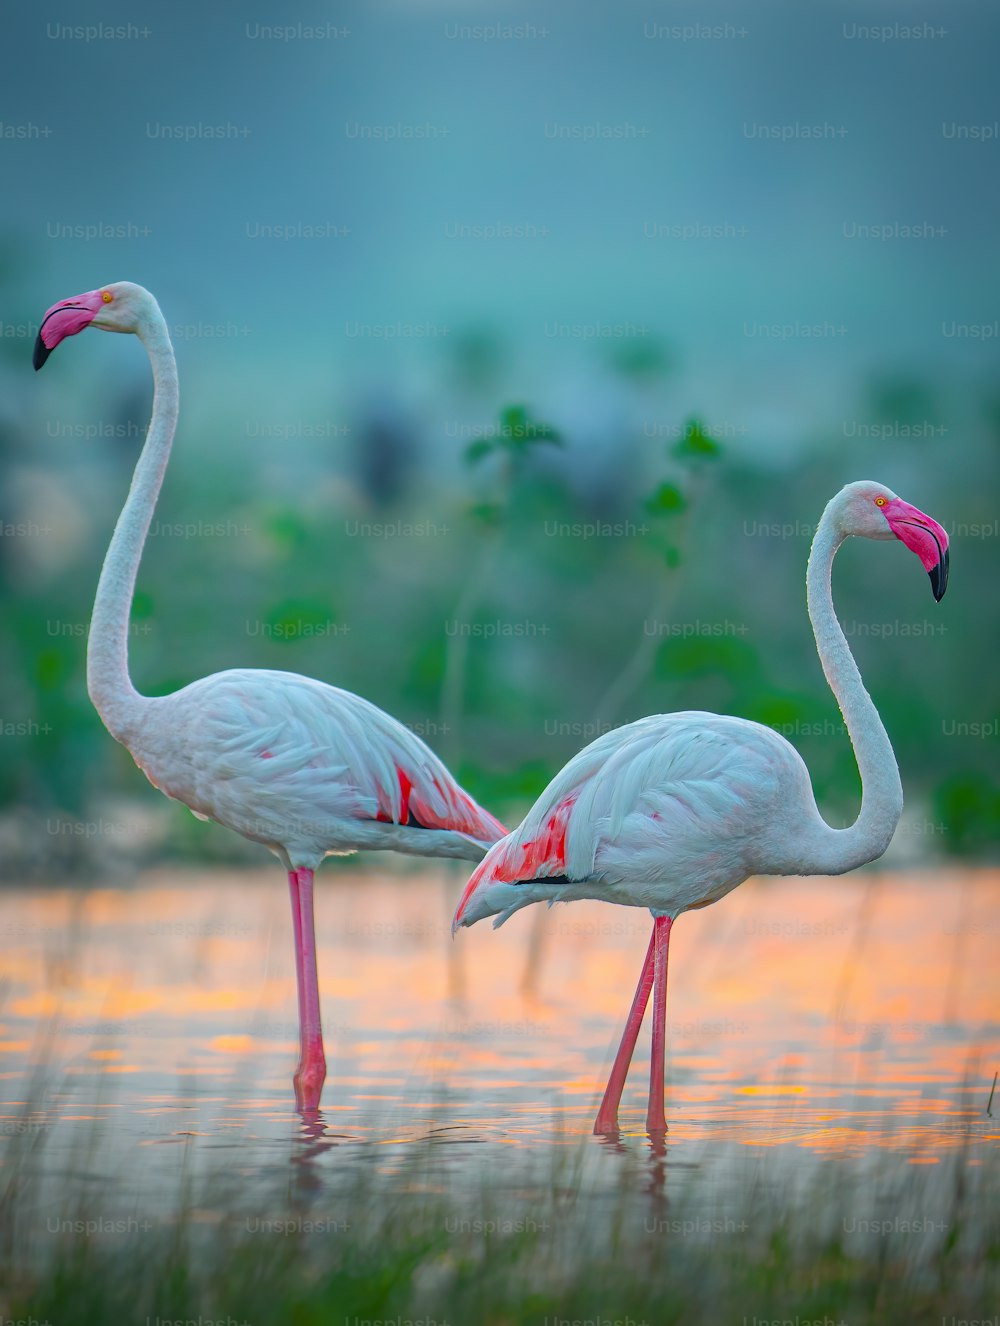 two flamingos are standing in a body of water